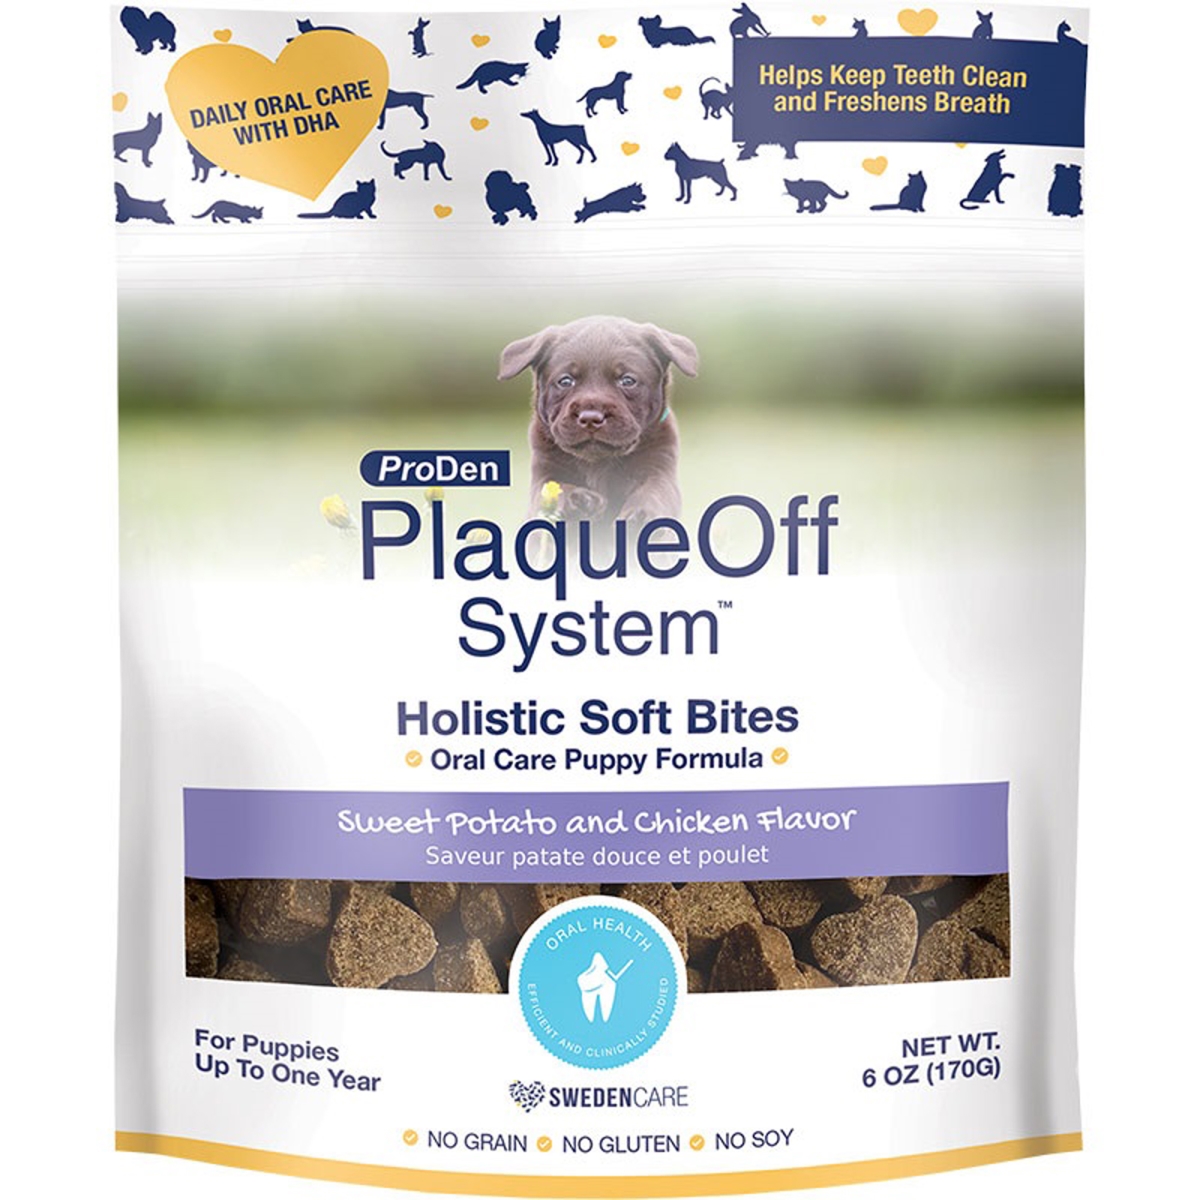 Picture of ProDen Plaqueoff 793888988941 Puppy Plaqueoff Bites for Dogs - 6 oz